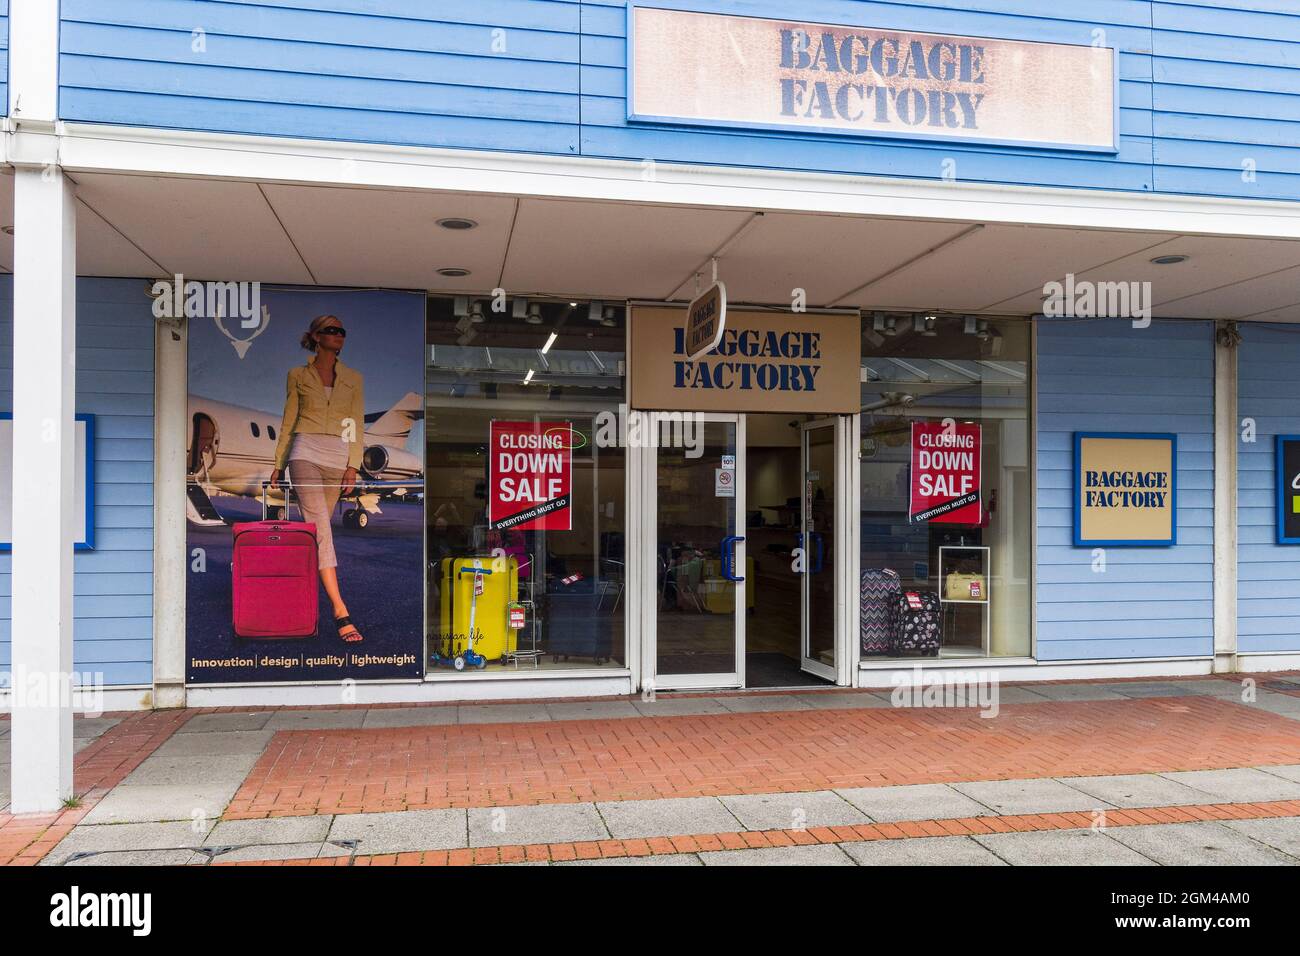 Page 3 - Factory Outlet High Resolution Stock Photography and Images - Alamy